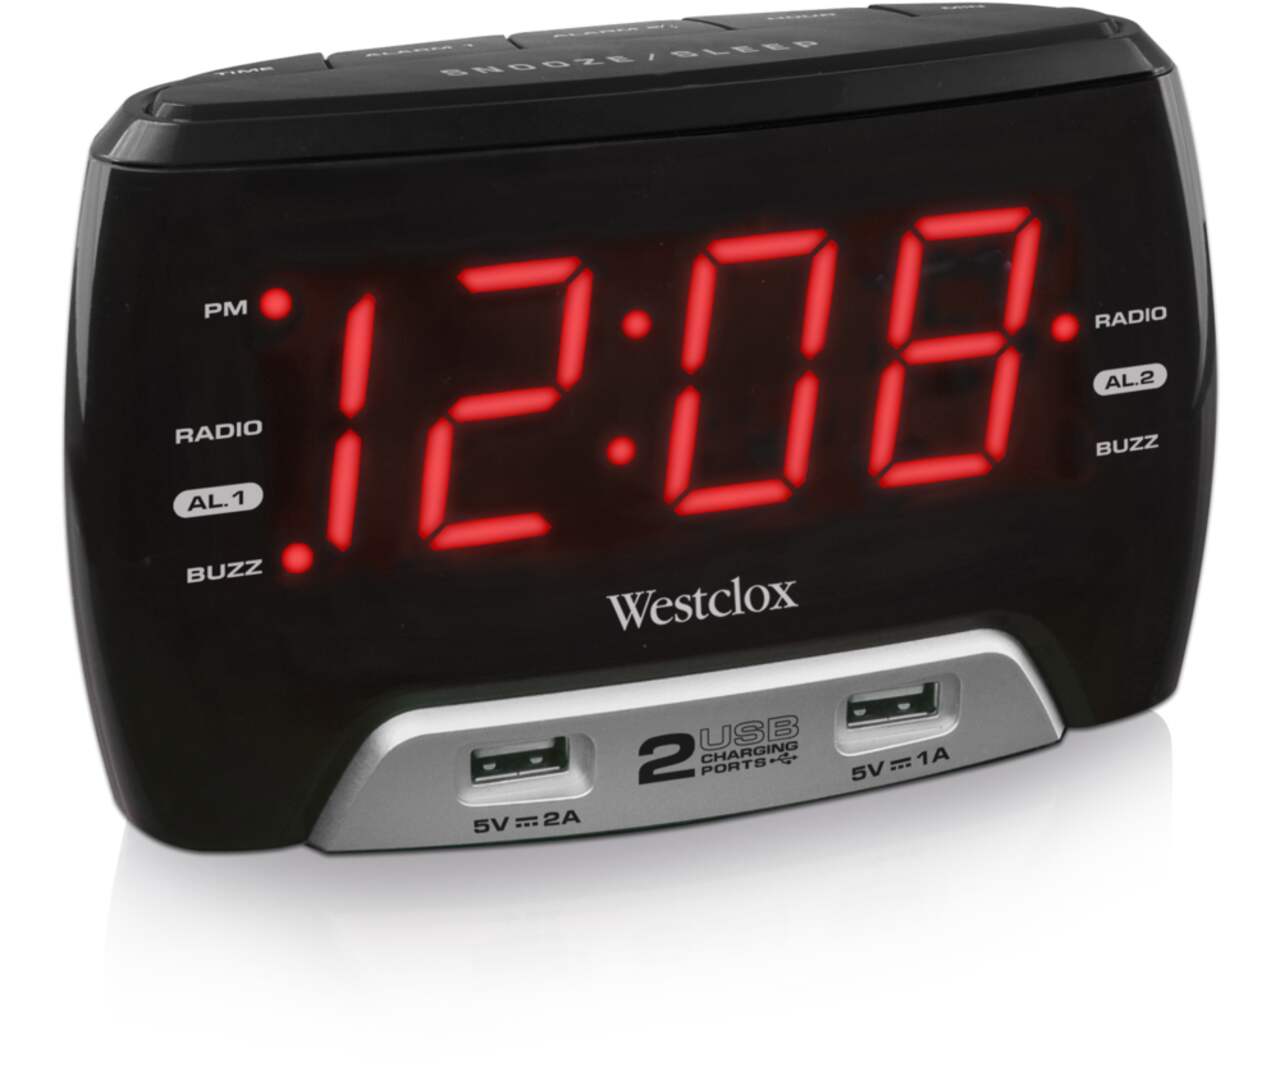 https://media-www.canadiantire.ca/product/living/electronics/home-communications/0441298/westclox-1-4-red-clock-radio-with-2-usb-charging-096c2162-1498-4a7a-8027-74f3c25451ff.png?imdensity=1&imwidth=1244&impolicy=mZoom